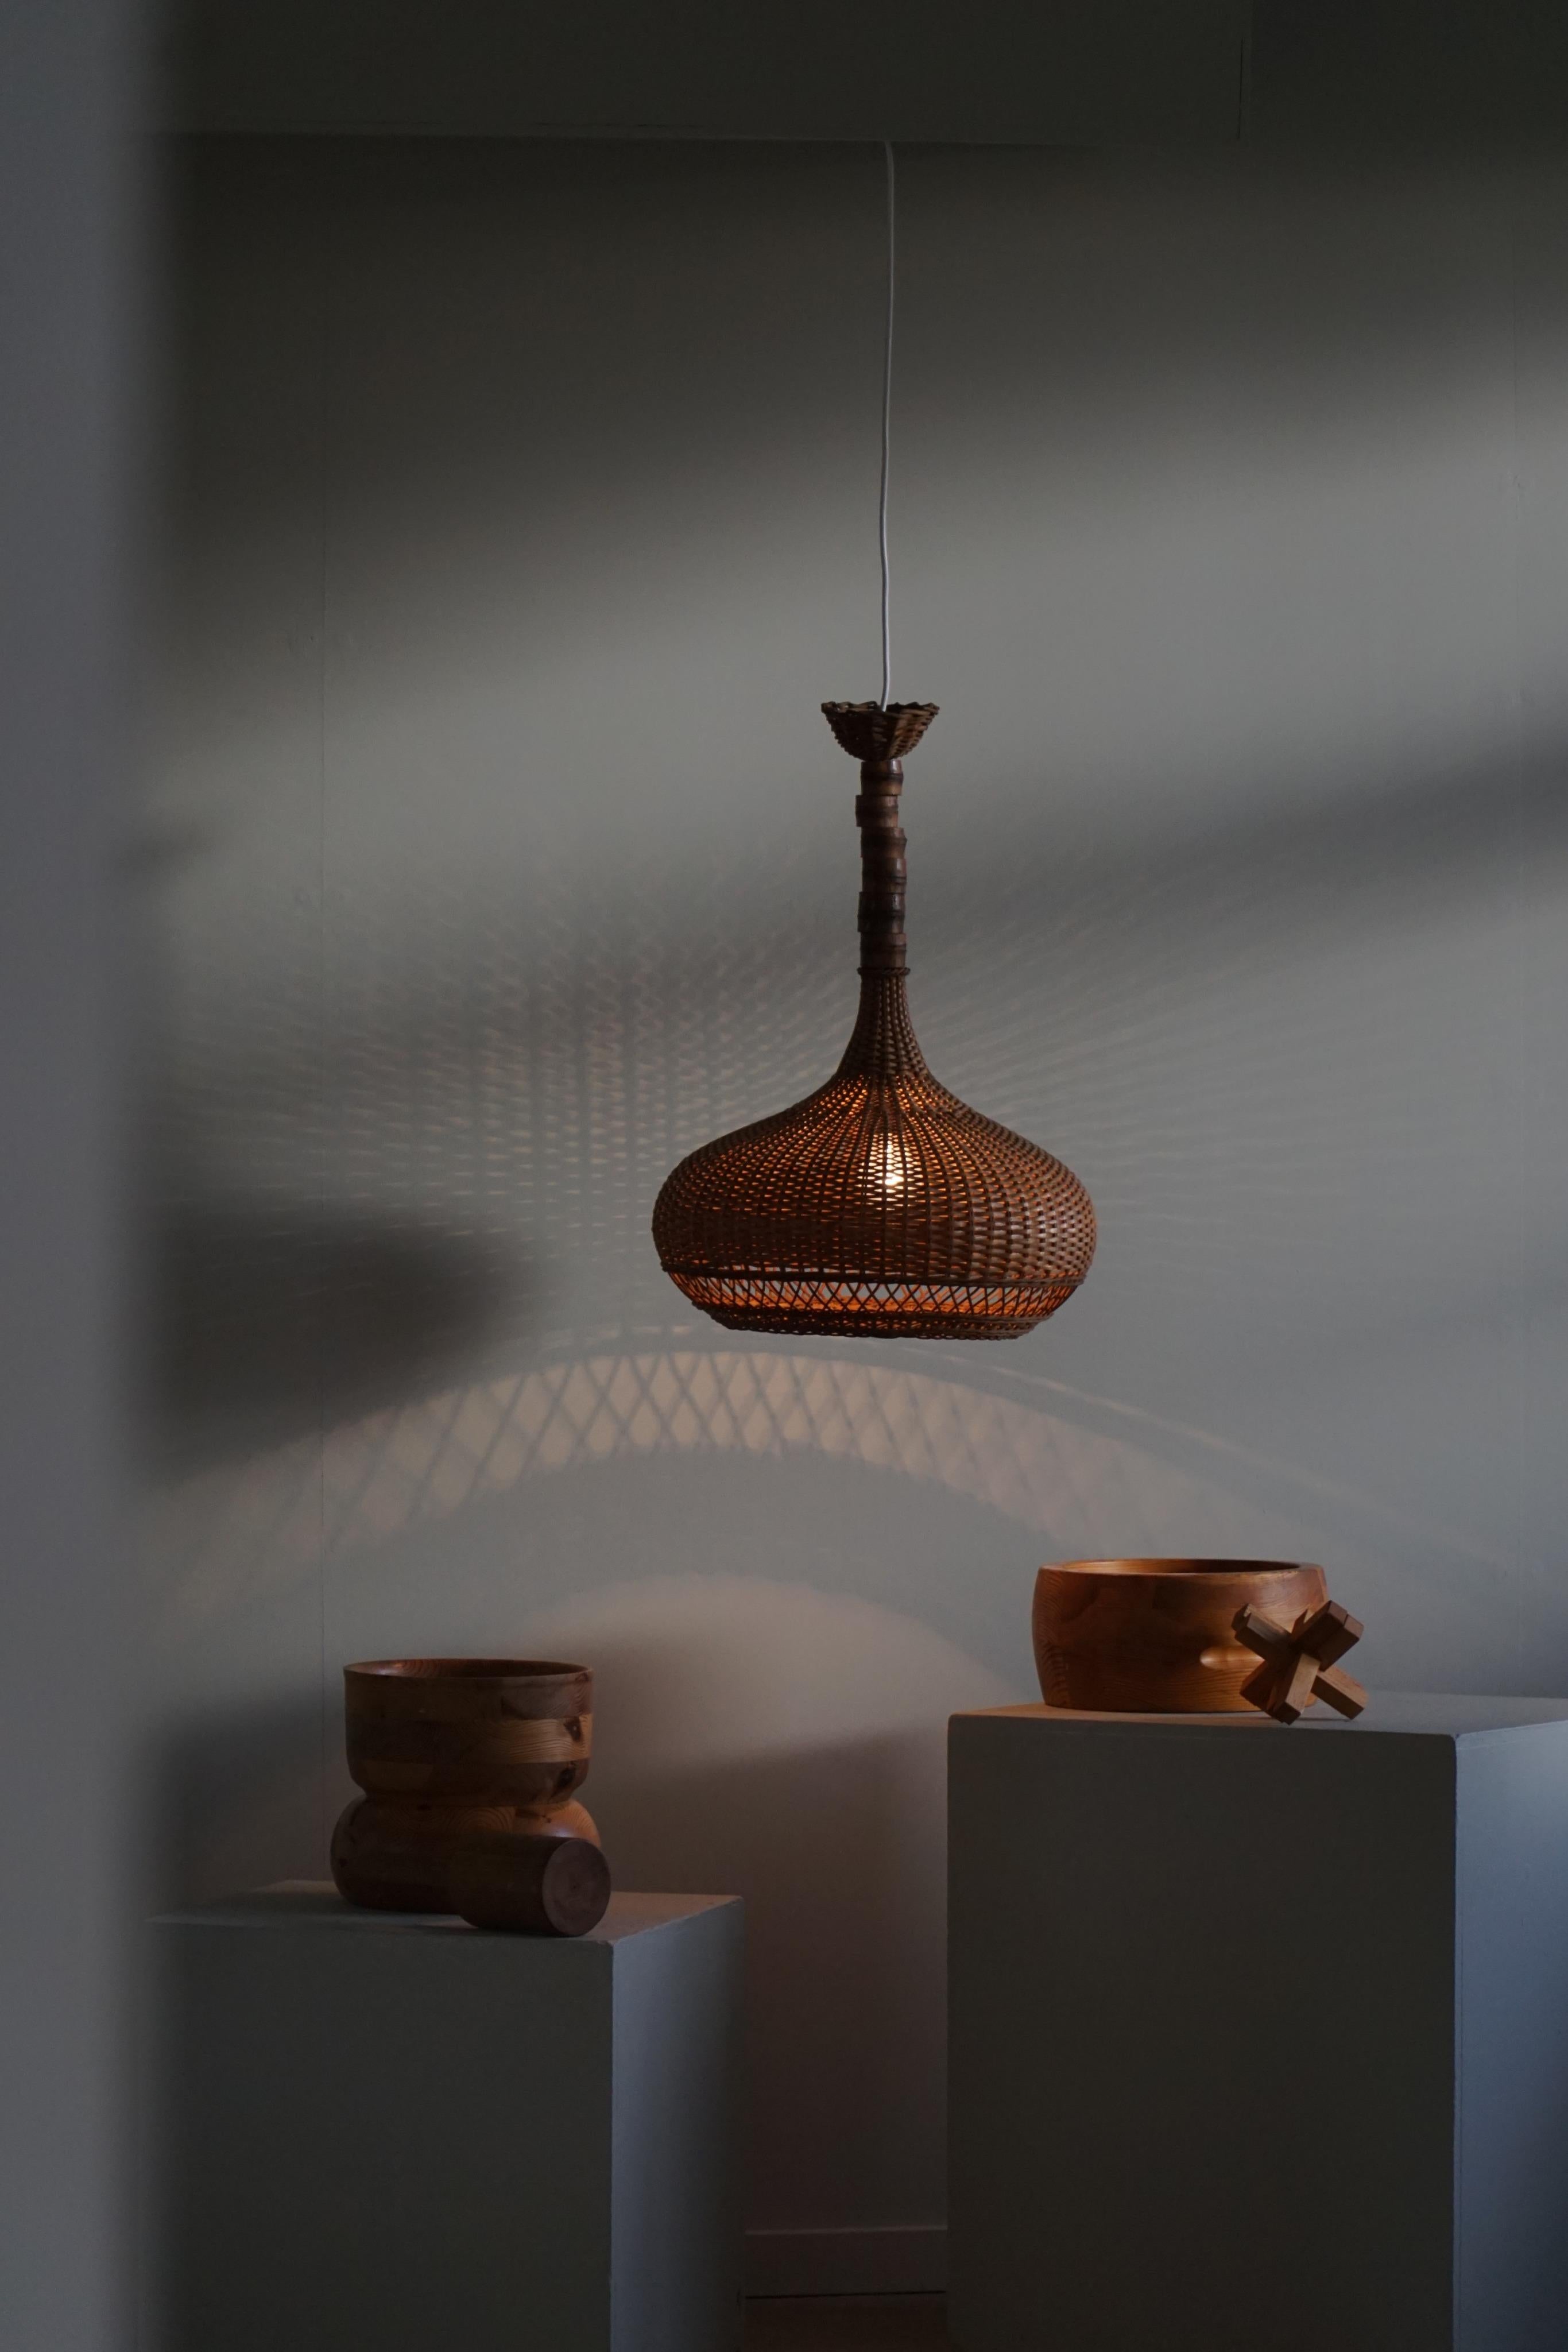 A cosy large pendant light in rattan. Made by a Danish cabinetmaker in 1960s. This pendant gives a calm and cosy light to your home. A beautiful object that pairs well with many types of interior styles. A Modern, Scandinavian, Classic or an Art